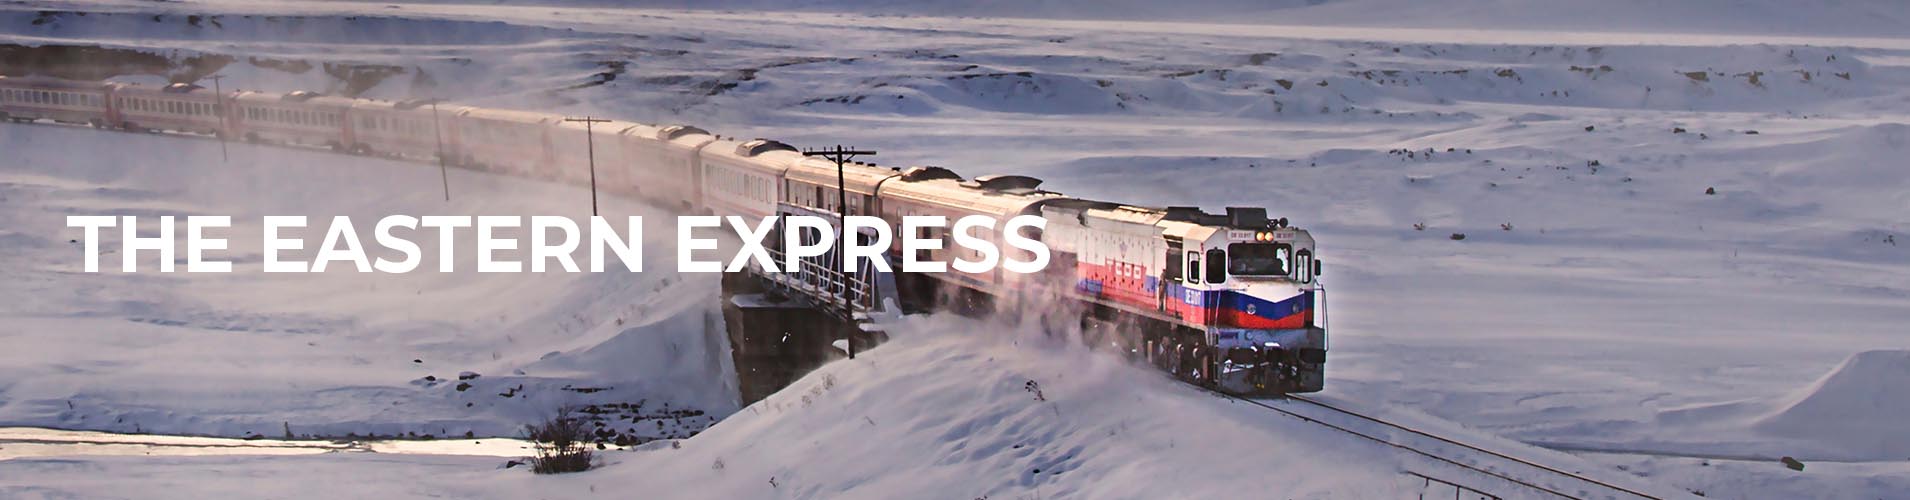 The Eastern Express